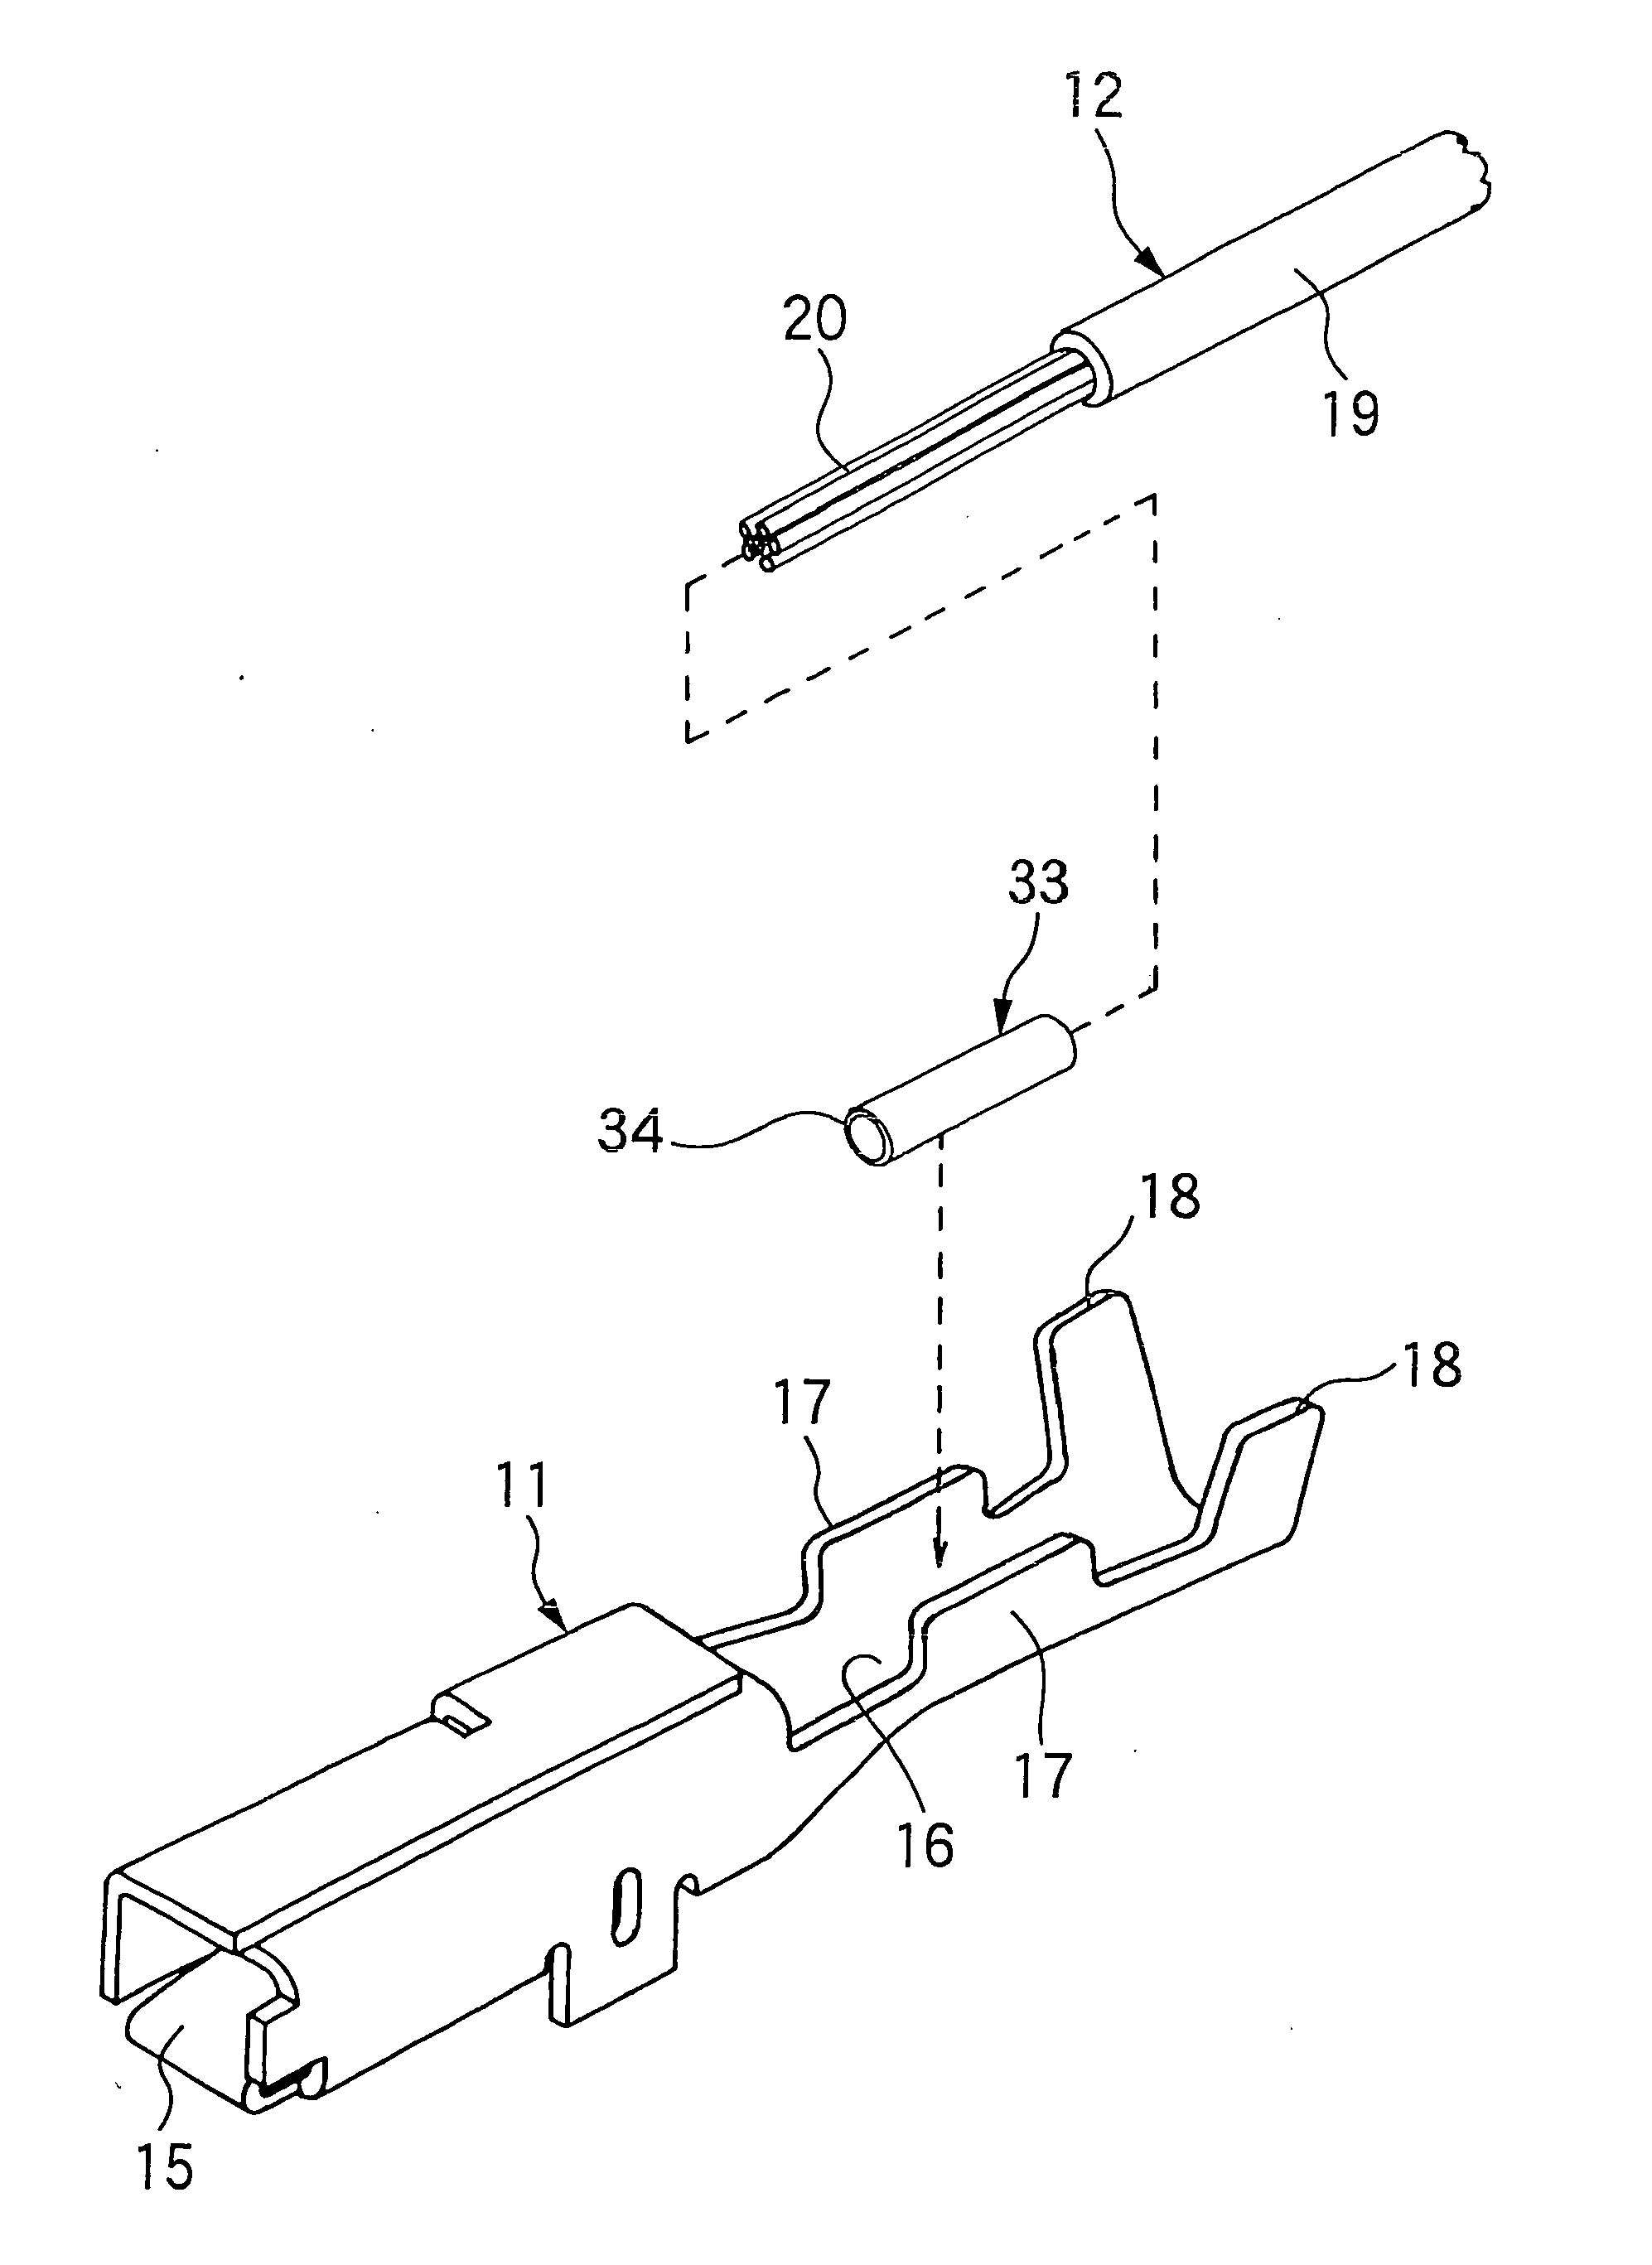 Wire press-clamping method